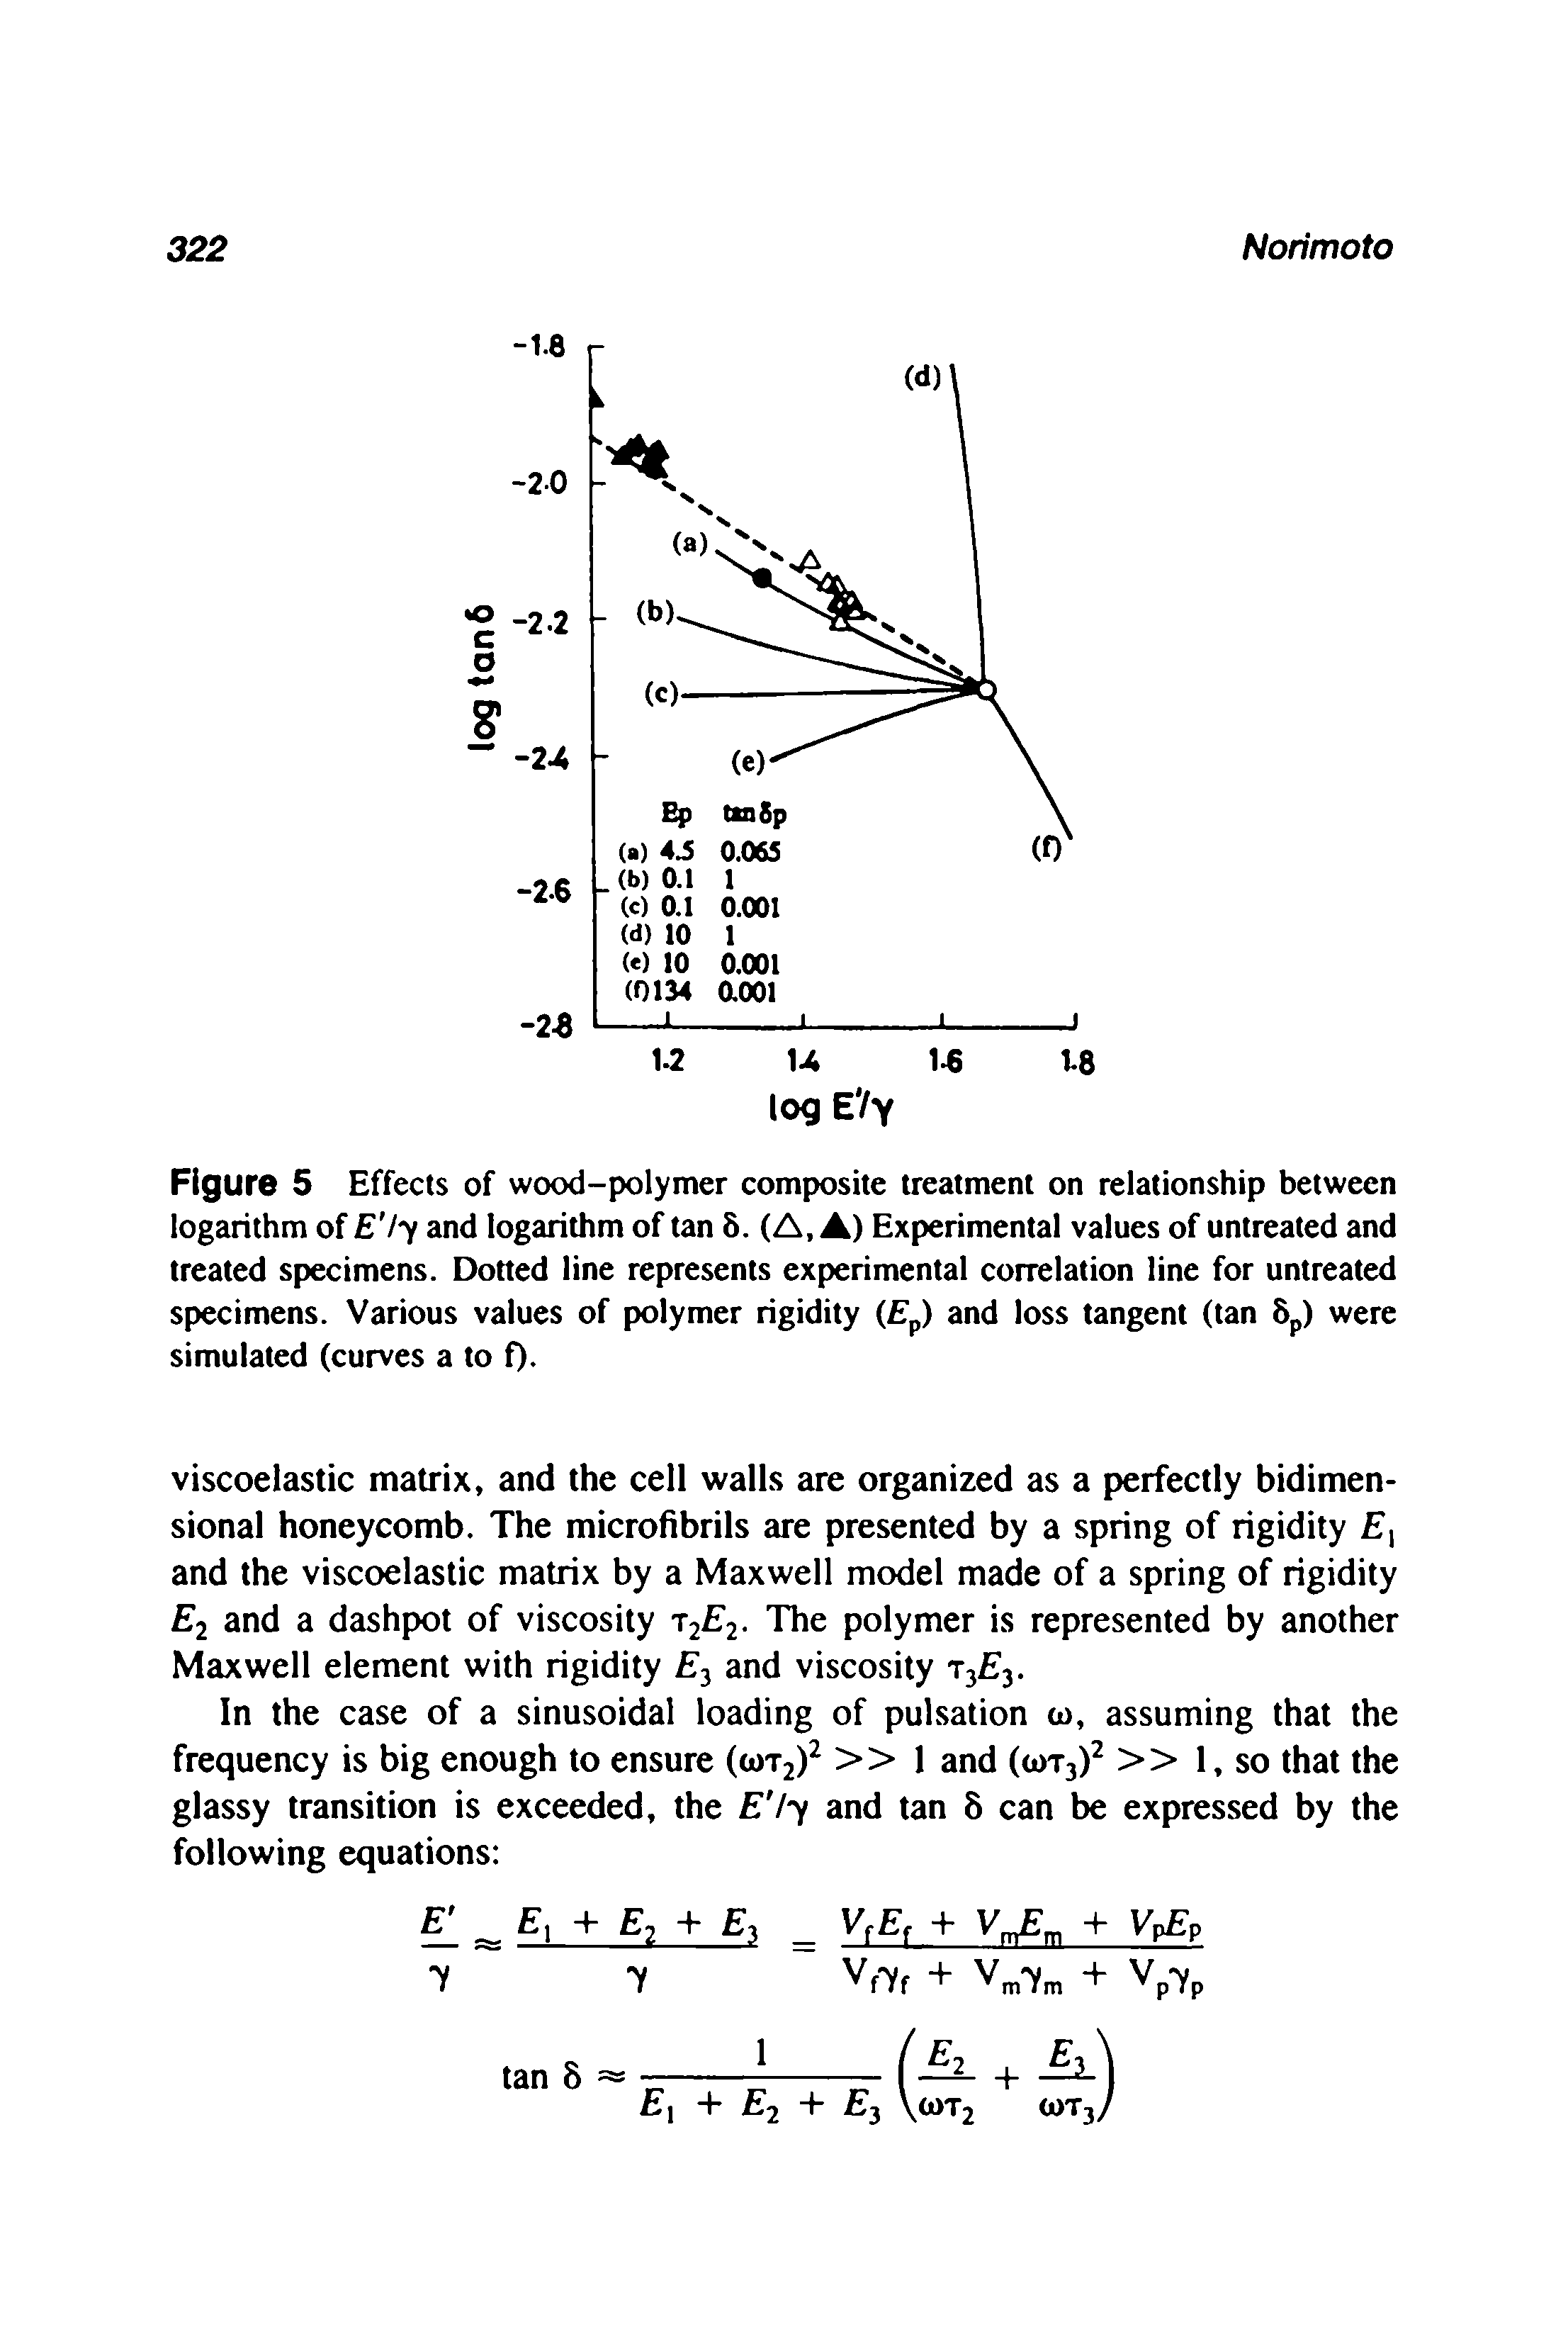 Figure 5 Effects of wood-polymer composite treatment on relationship between logarithm of E /y and logarithm of tan 5. (A, A) Experimental values of untreated and treated specimens. Dotted line represents experimental correlation line for untreated specimens. Various values of polymer rigidity ( p) and loss tangent (tan 8p) were simulated (curves a to 0-...